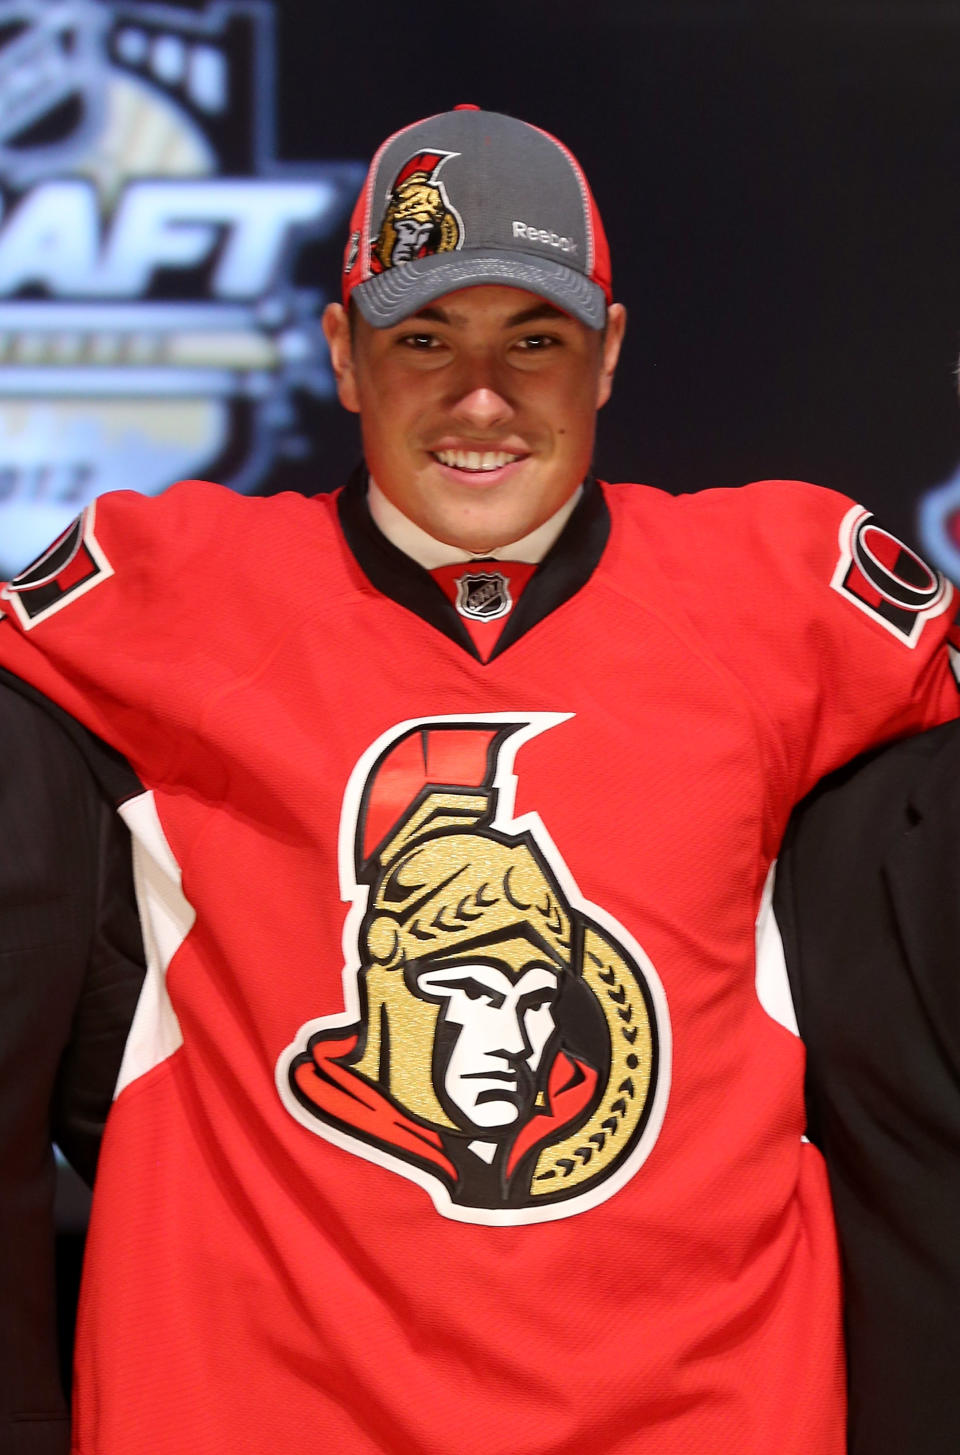 PITTSBURGH, PA - JUNE 22: Cody Ceci, 15th overall pick by the Ottawa Senators, poses on stage during Round One of the 2012 NHL Entry Draft at Consol Energy Center on June 22, 2012 in Pittsburgh, Pennsylvania. (Photo by Bruce Bennett/Getty Images)